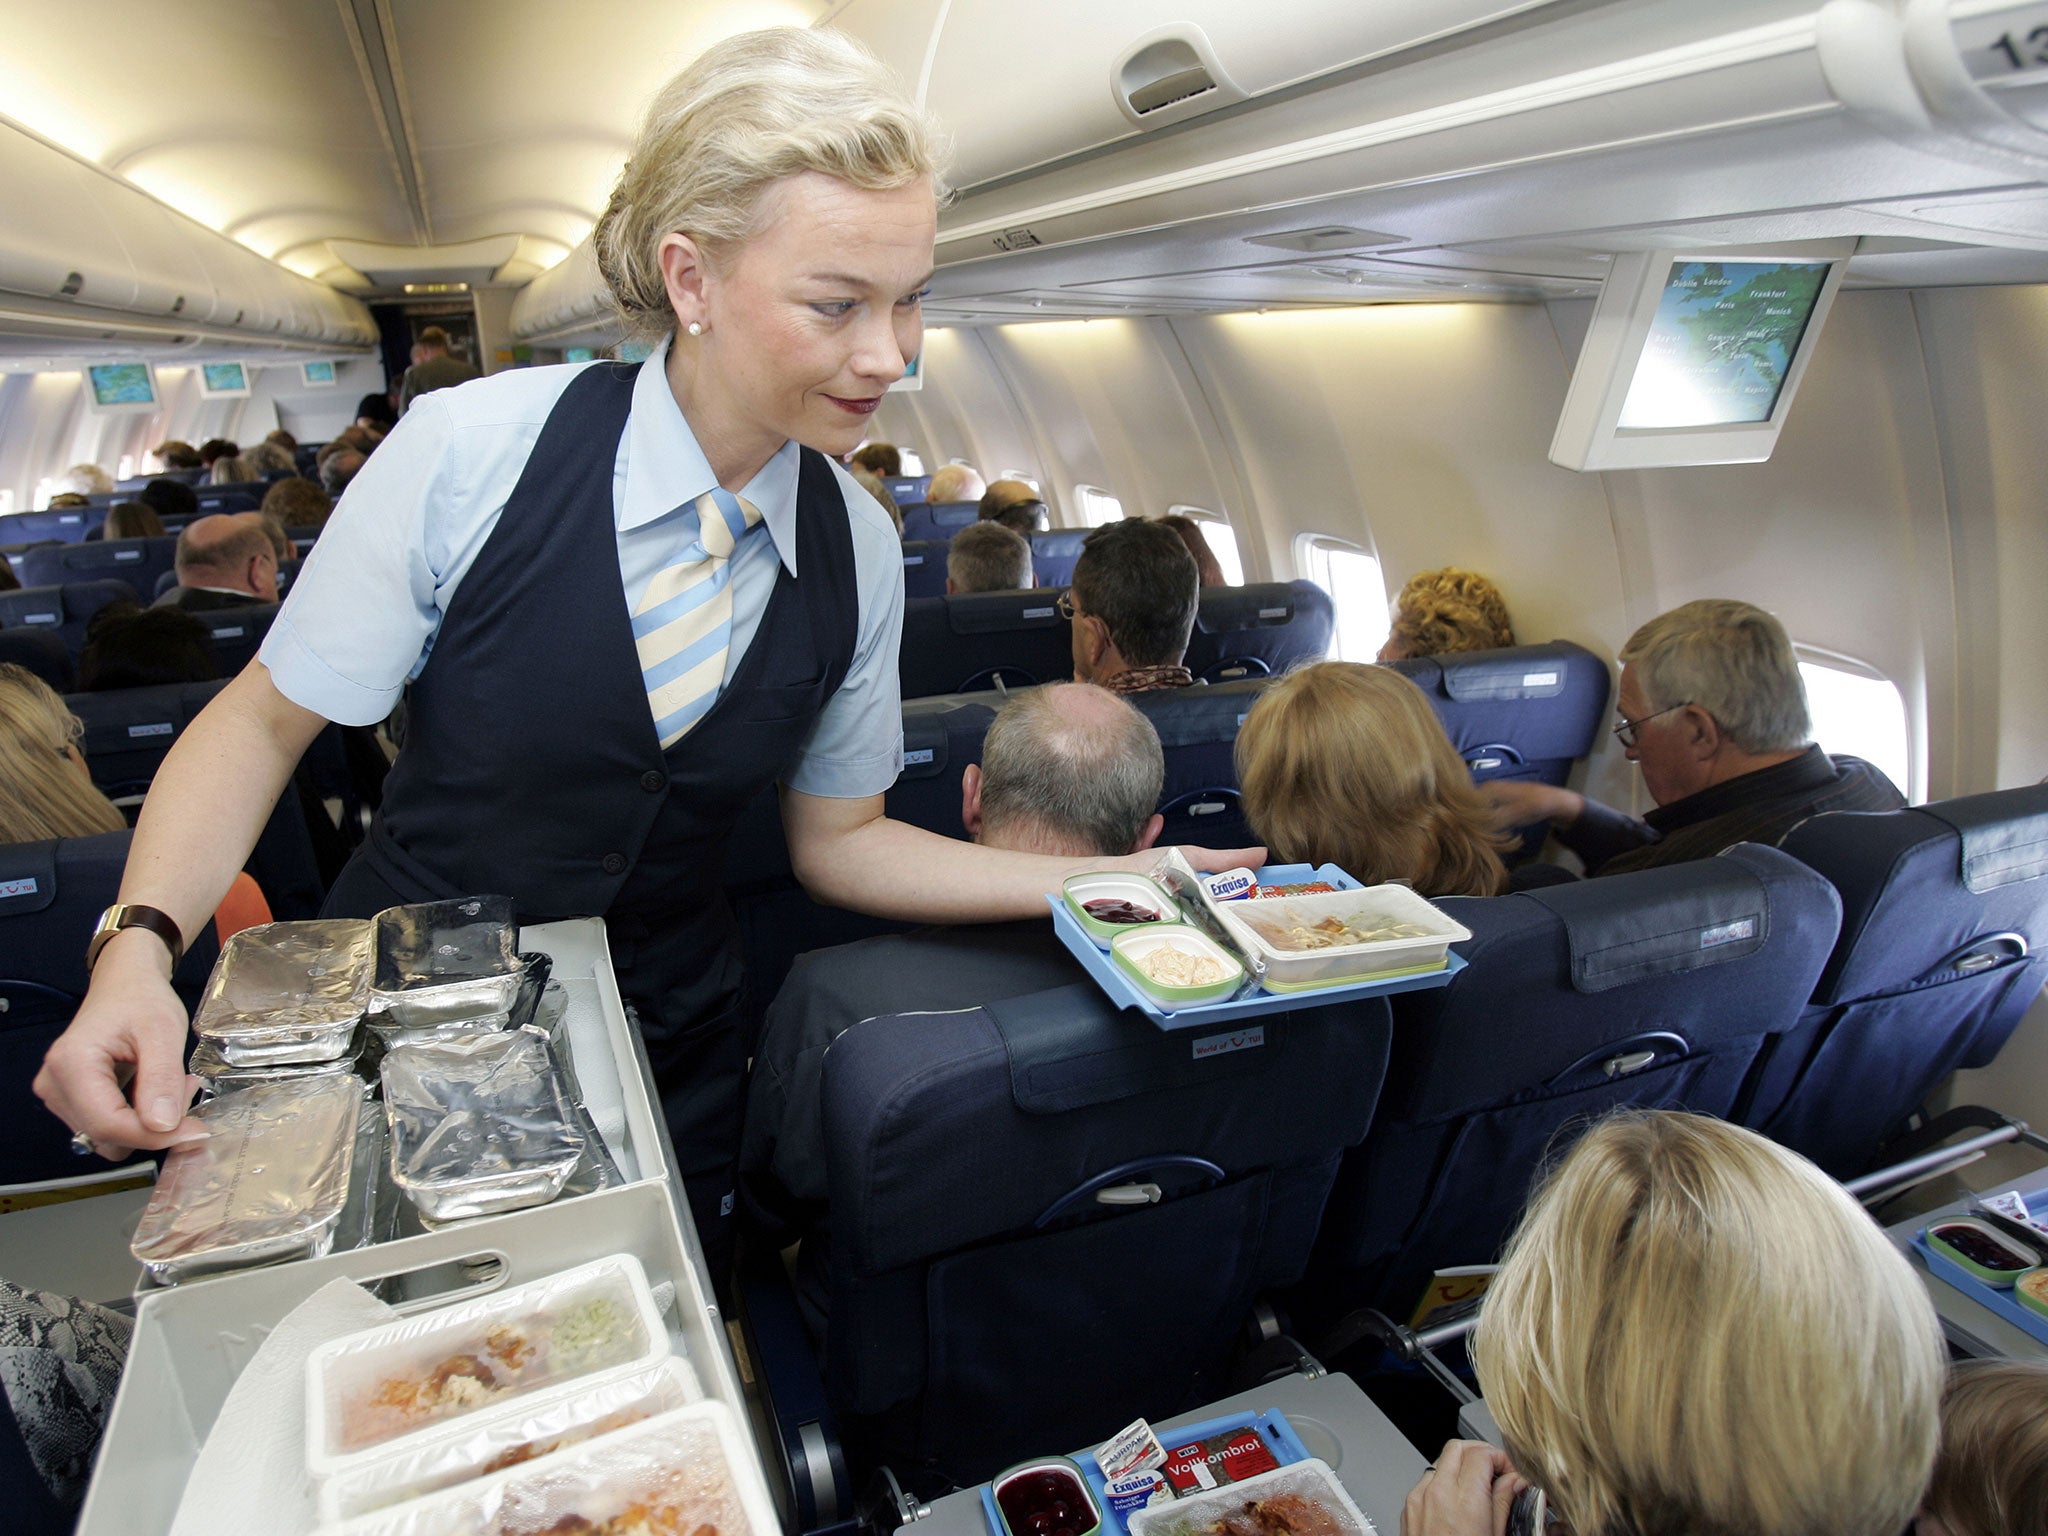 Airplane Public Porn - Flight attendants share the 25 things they wish passengers ...